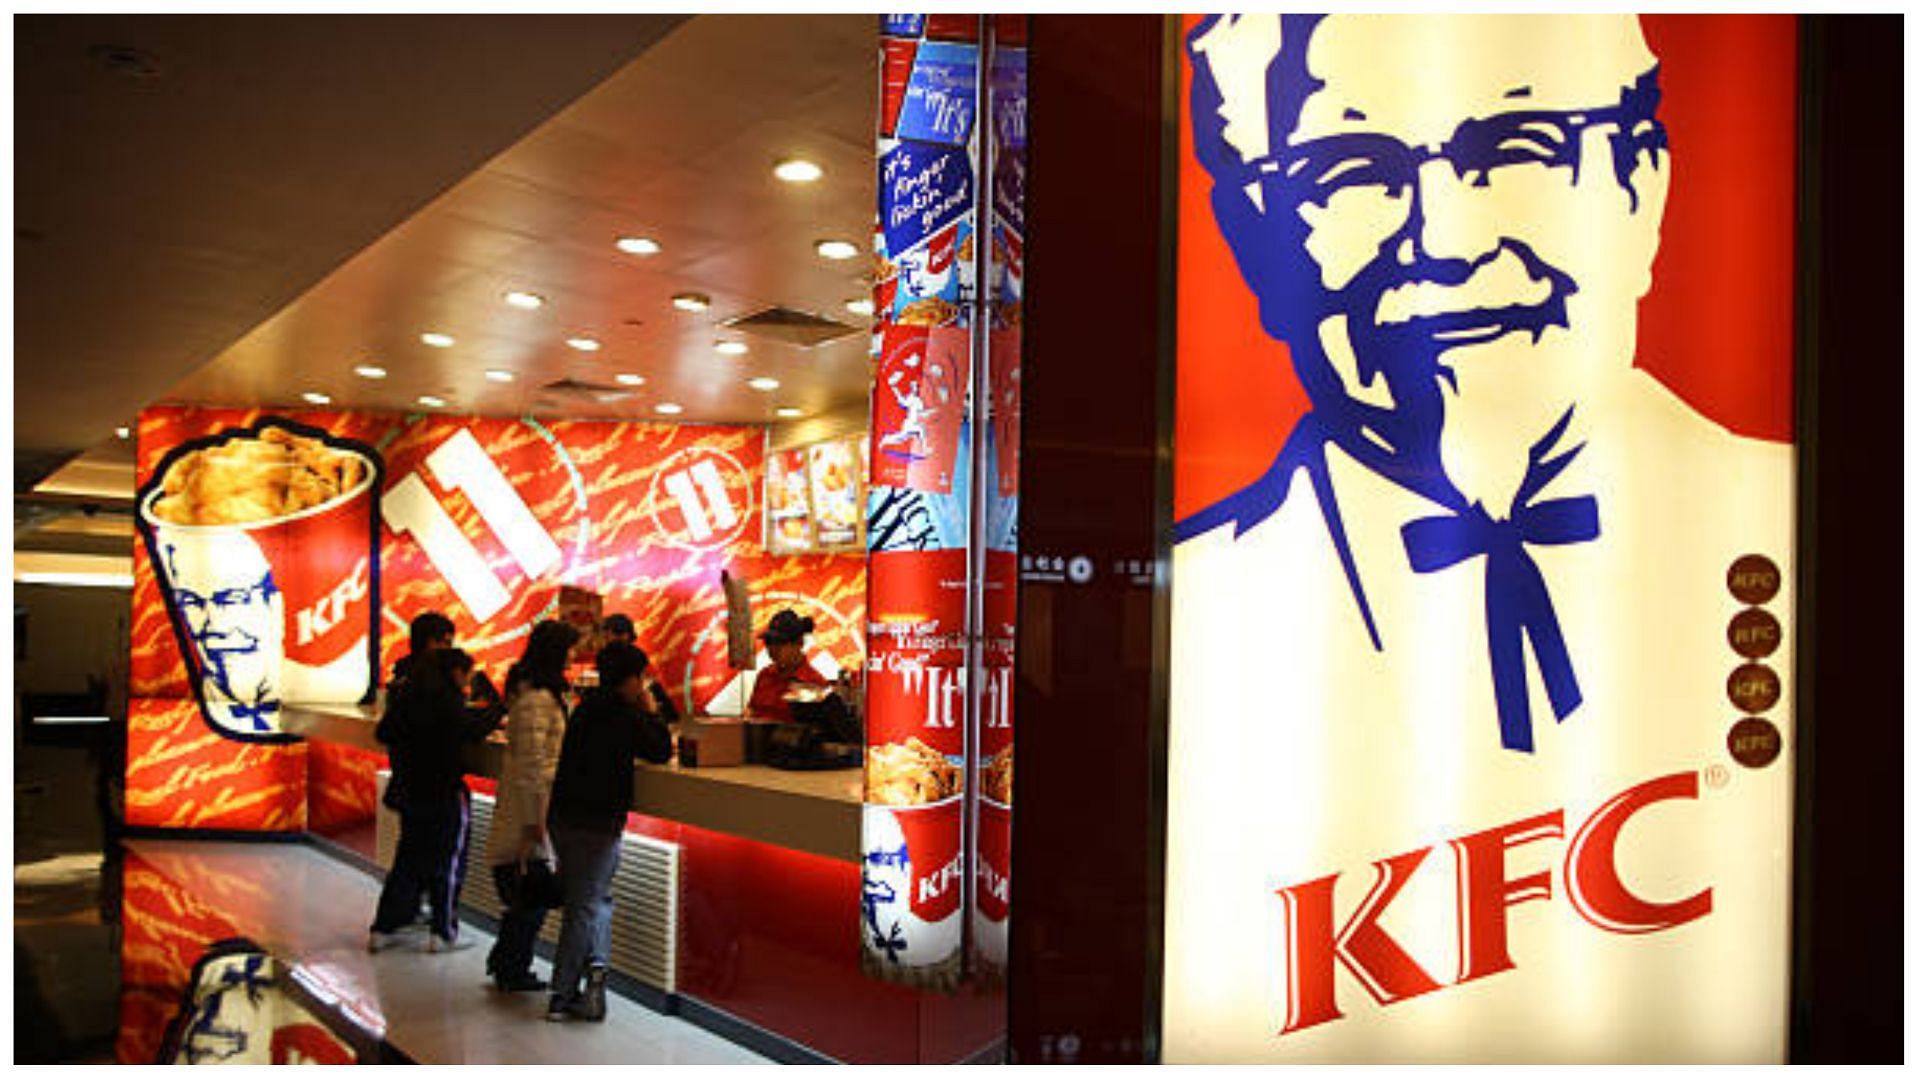 List of KFC offerings revealed for this Thanksgiving! (Image via GettyImages)